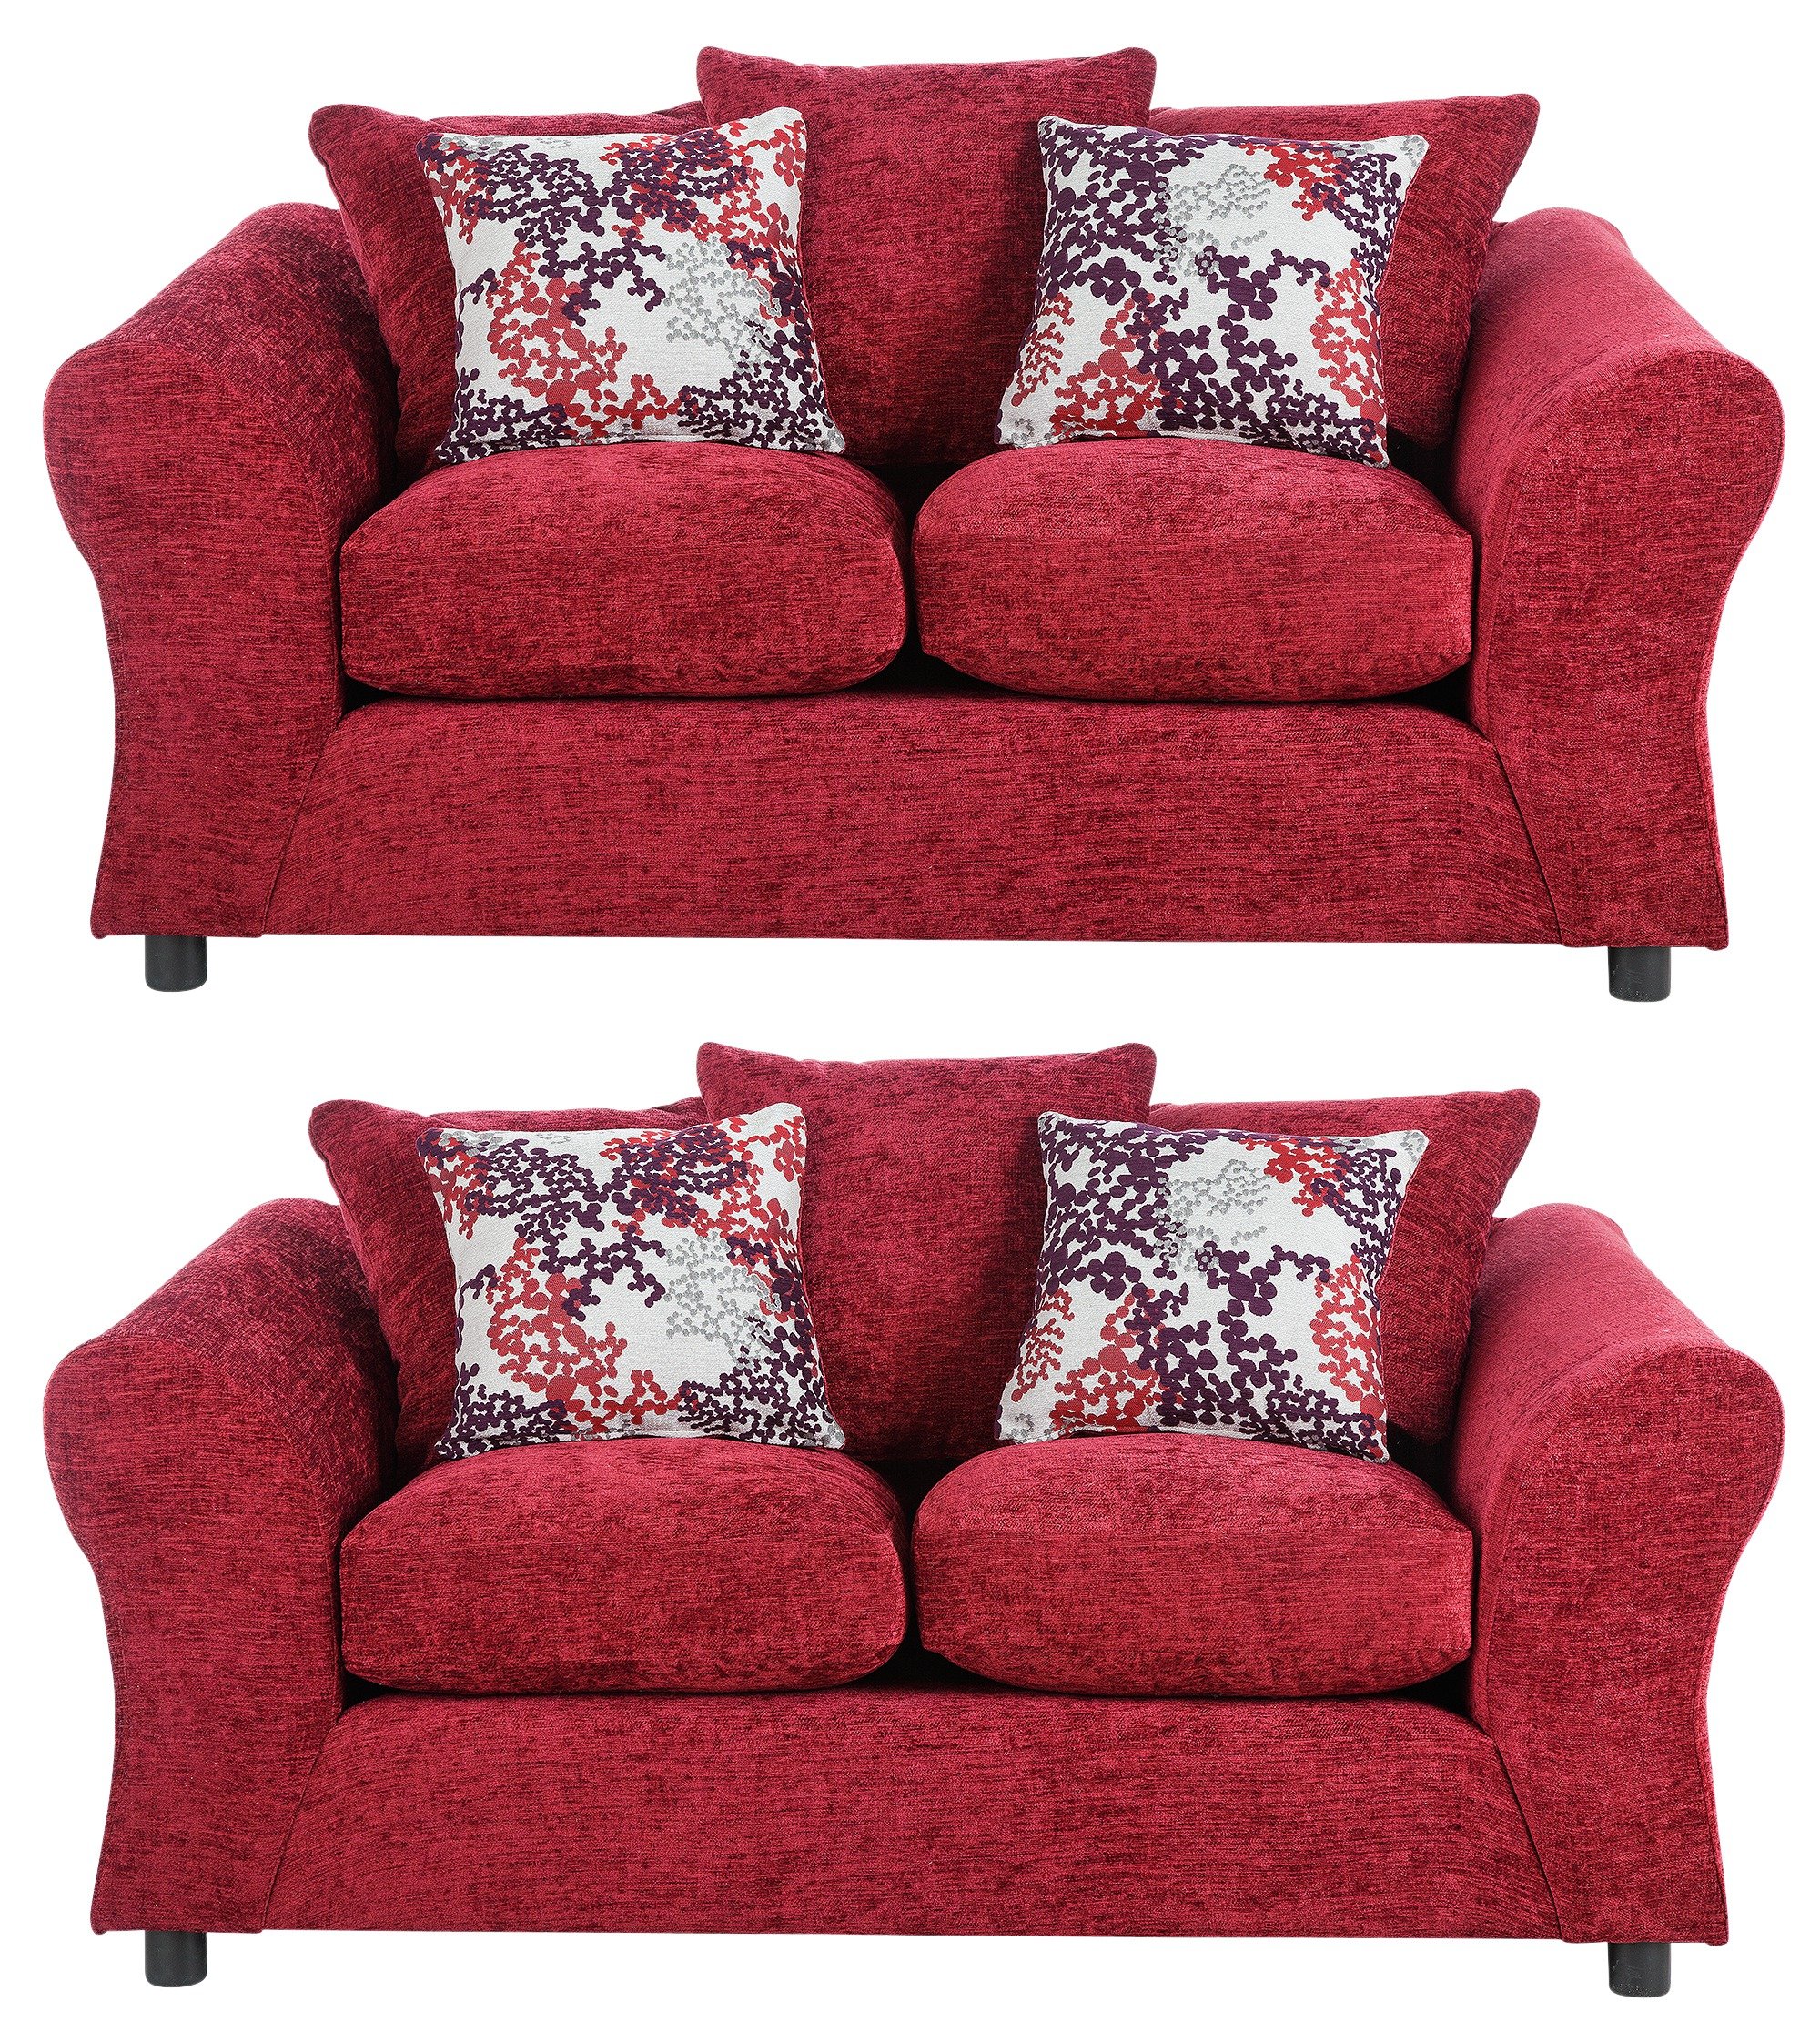 Argos Home Clara Fabric Pair of Compact 2 Seater Sofas - Red